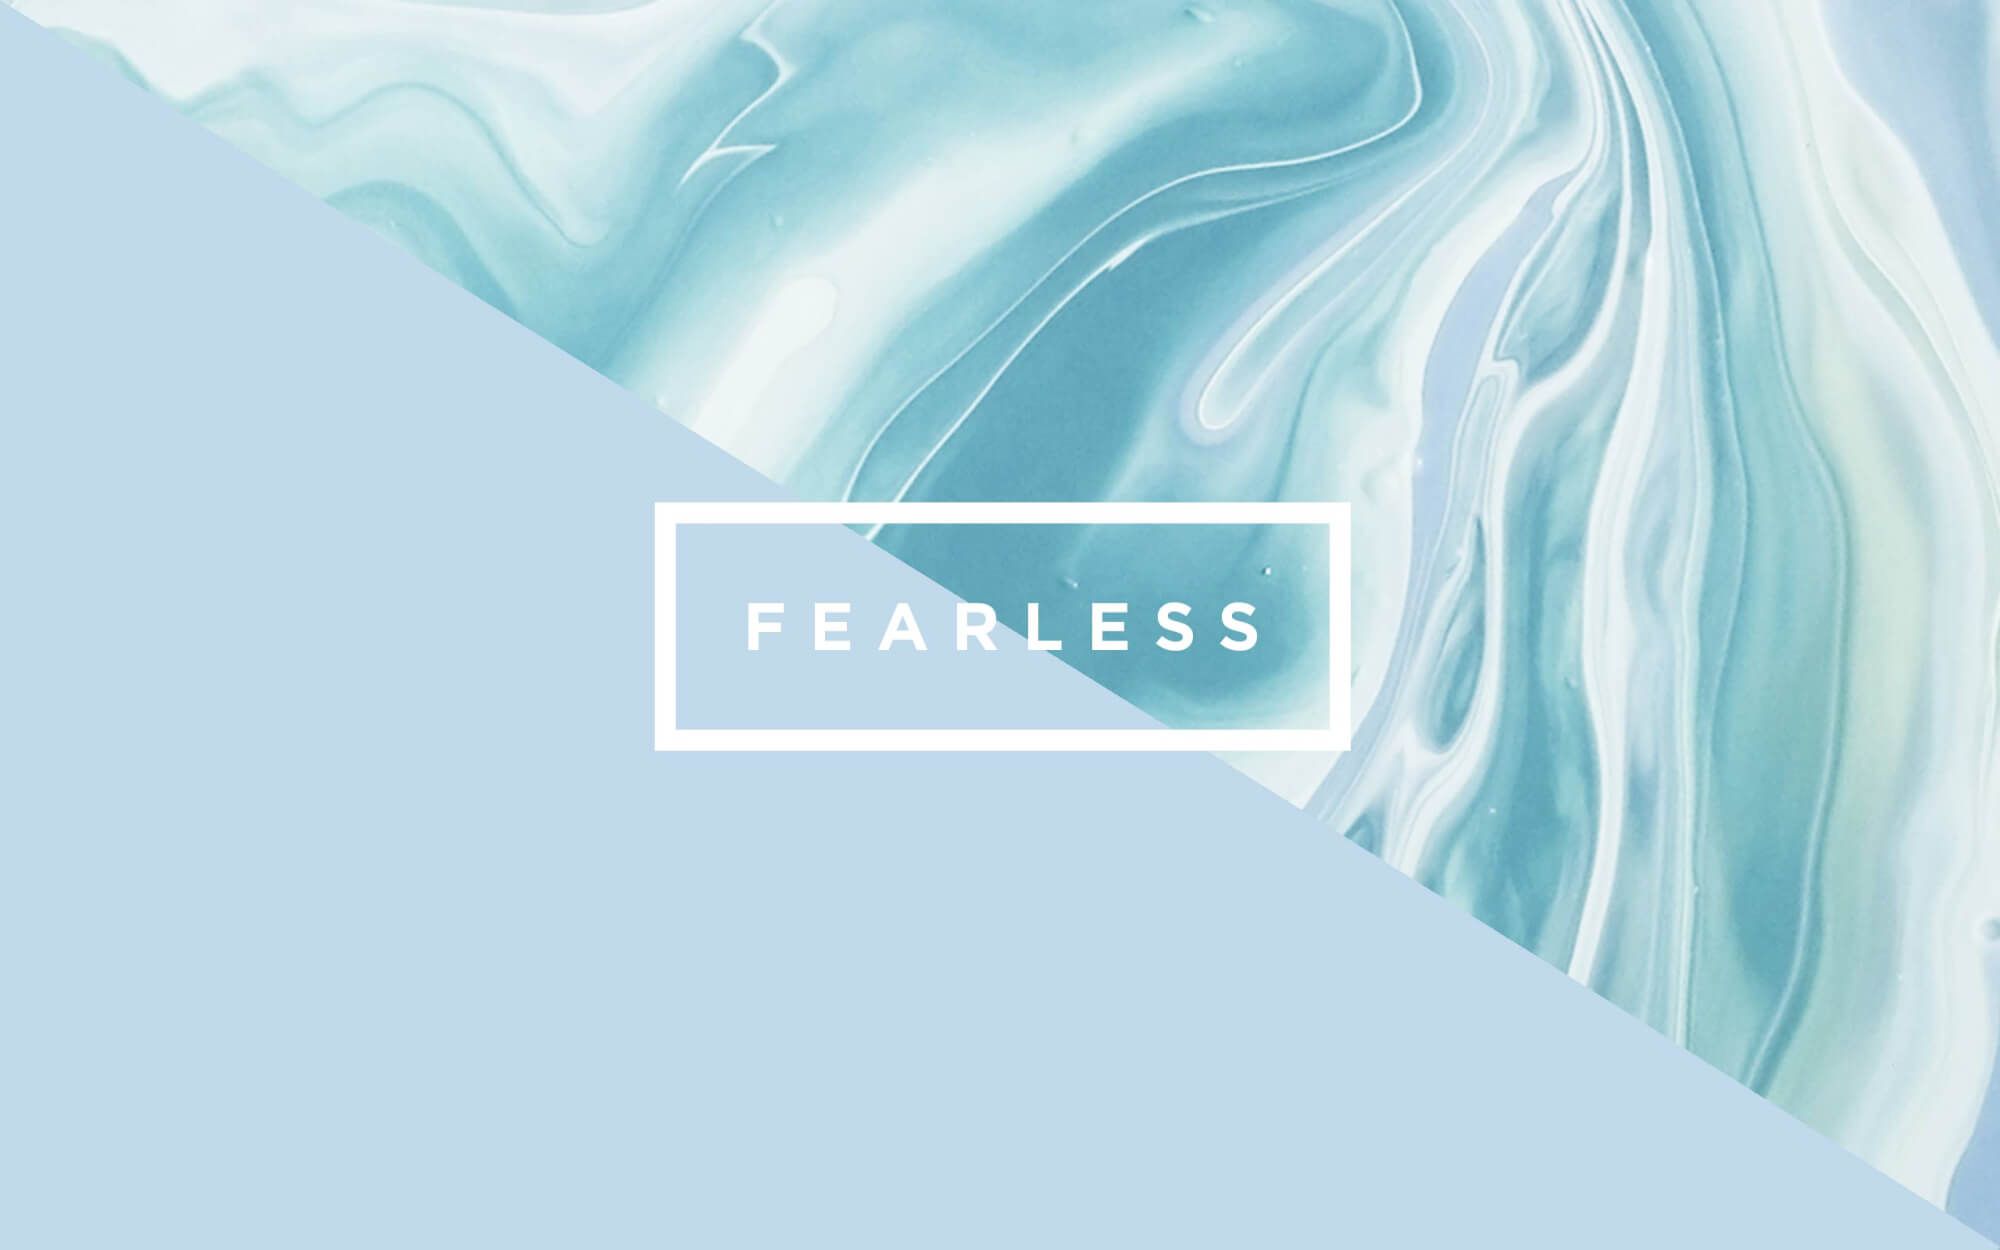 Fearlessness - a quote on an abstract background - Teal, wave